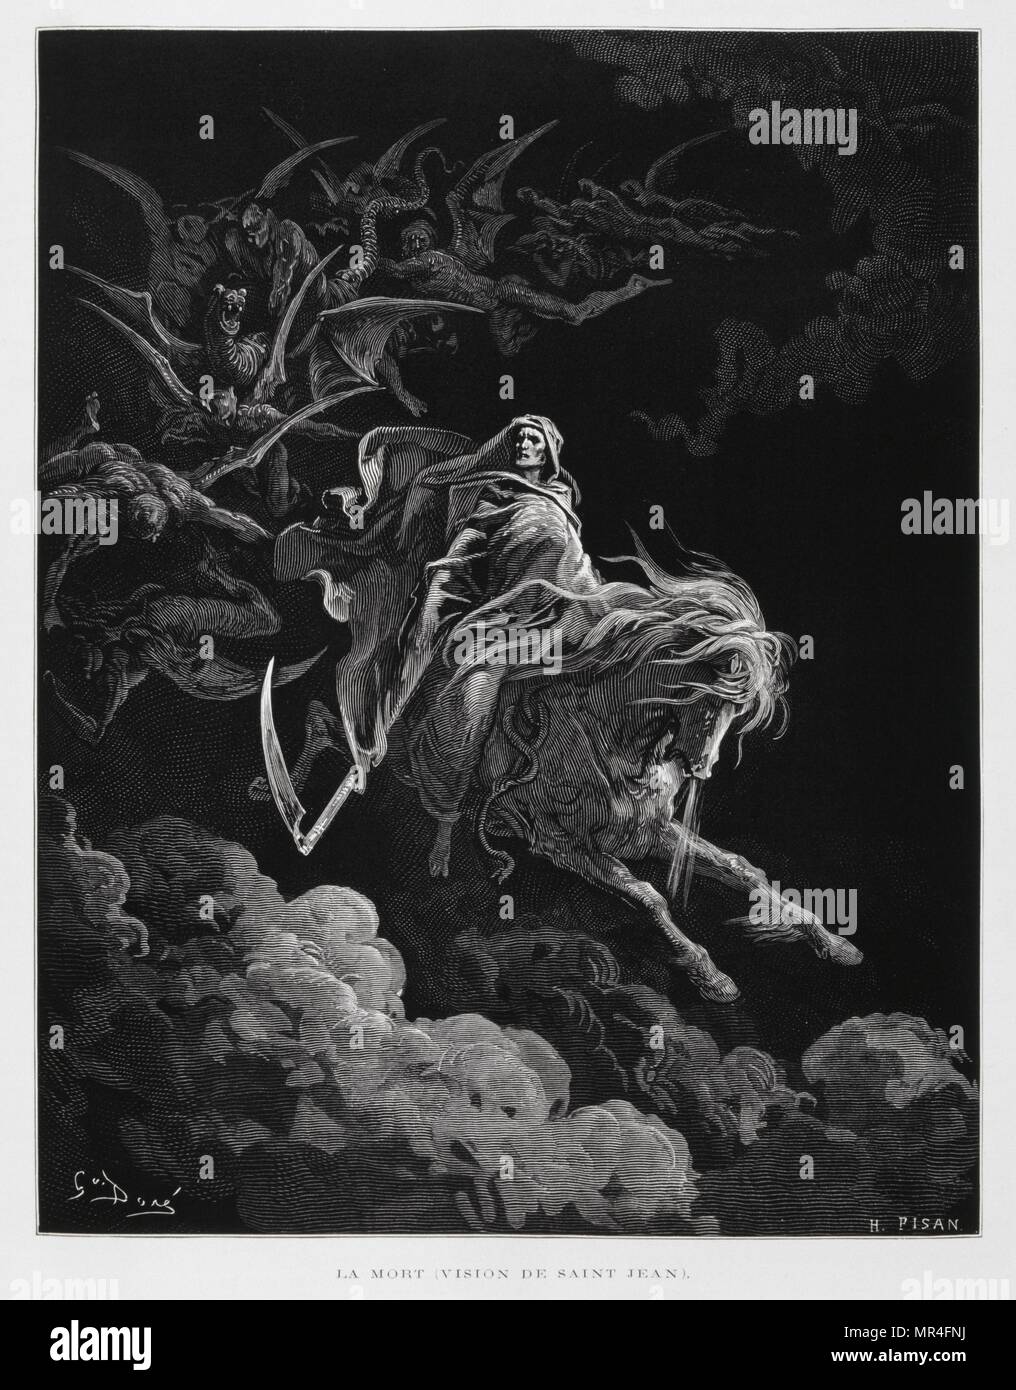 Death on horseback, (vision of John the Baptist), Illustration from the Dore Bible 1866. In 1866, the French artist and illustrator Gustave Doré (1832–1883), published a series of 241 wood engravings for a new deluxe edition of the 1843 French translation of the Vulgate Bible, popularly known as the Bible de Tours. This new edition was known as La Grande Bible de Tours and its illustrations were immensely successful. Stock Photo